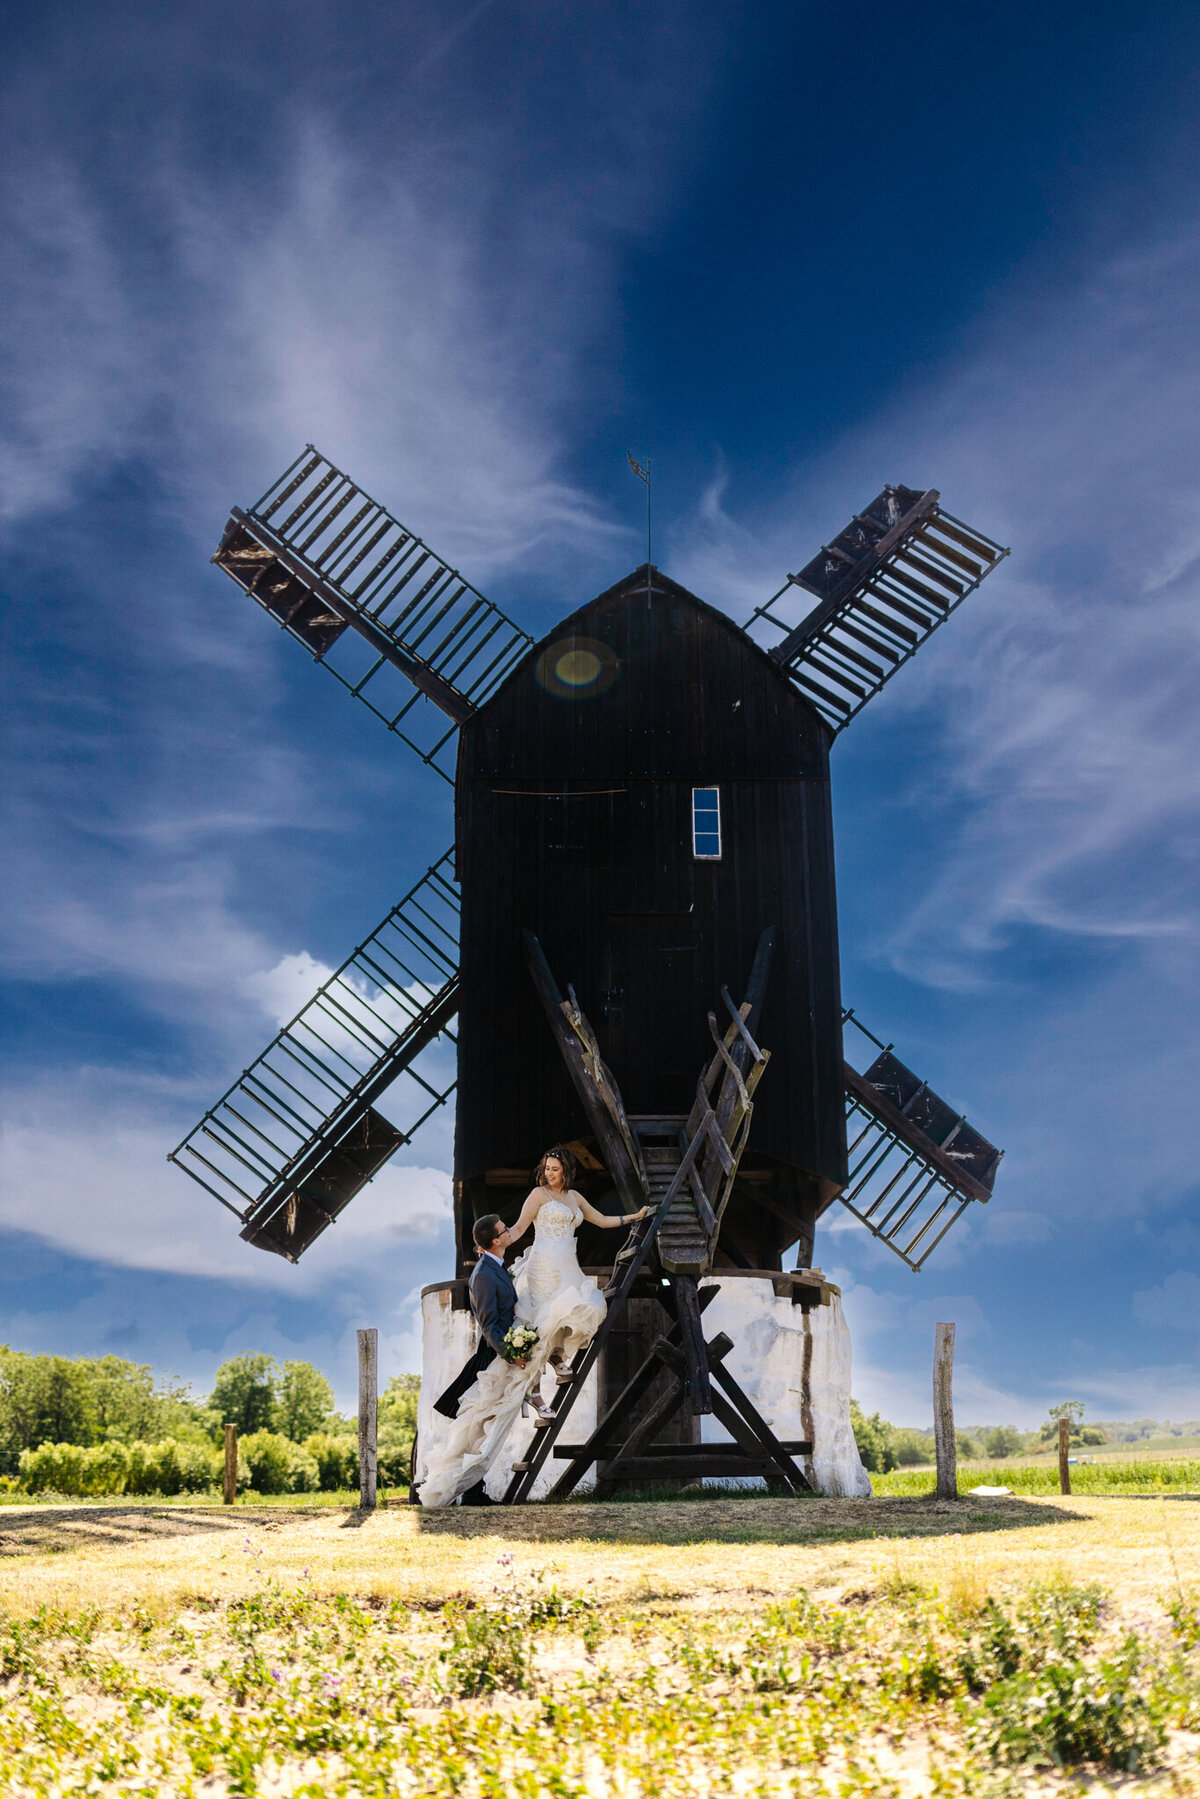 The beautiful windmills that is a beautiful backdrop for a wedding package abroad for 2